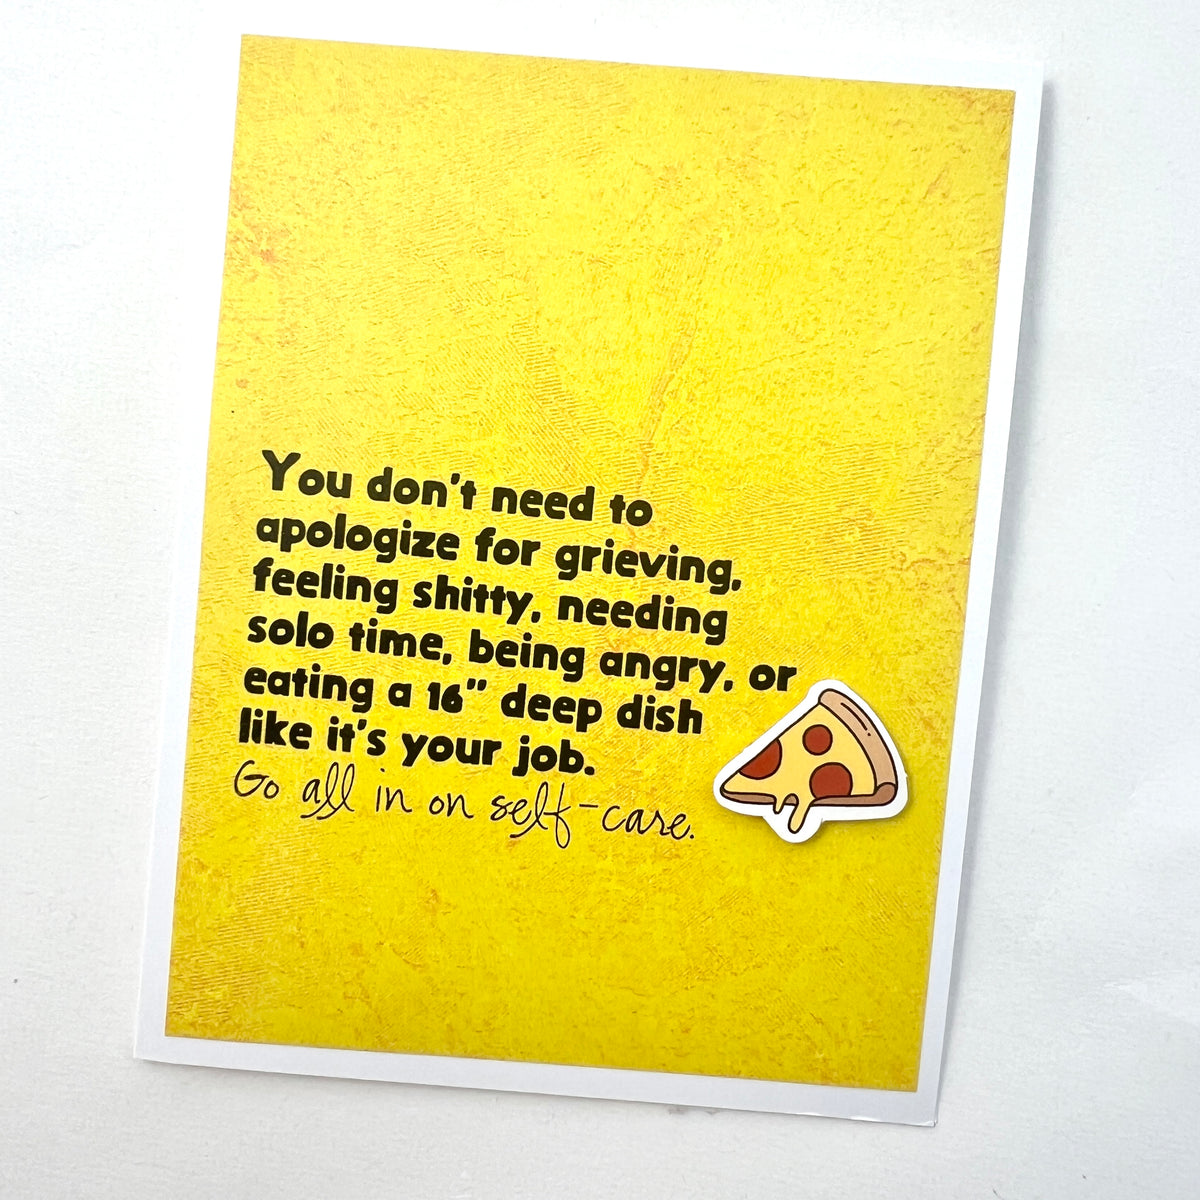 Empathy 16” Deep Dish Pizza Go All In on Self-Care pizza card